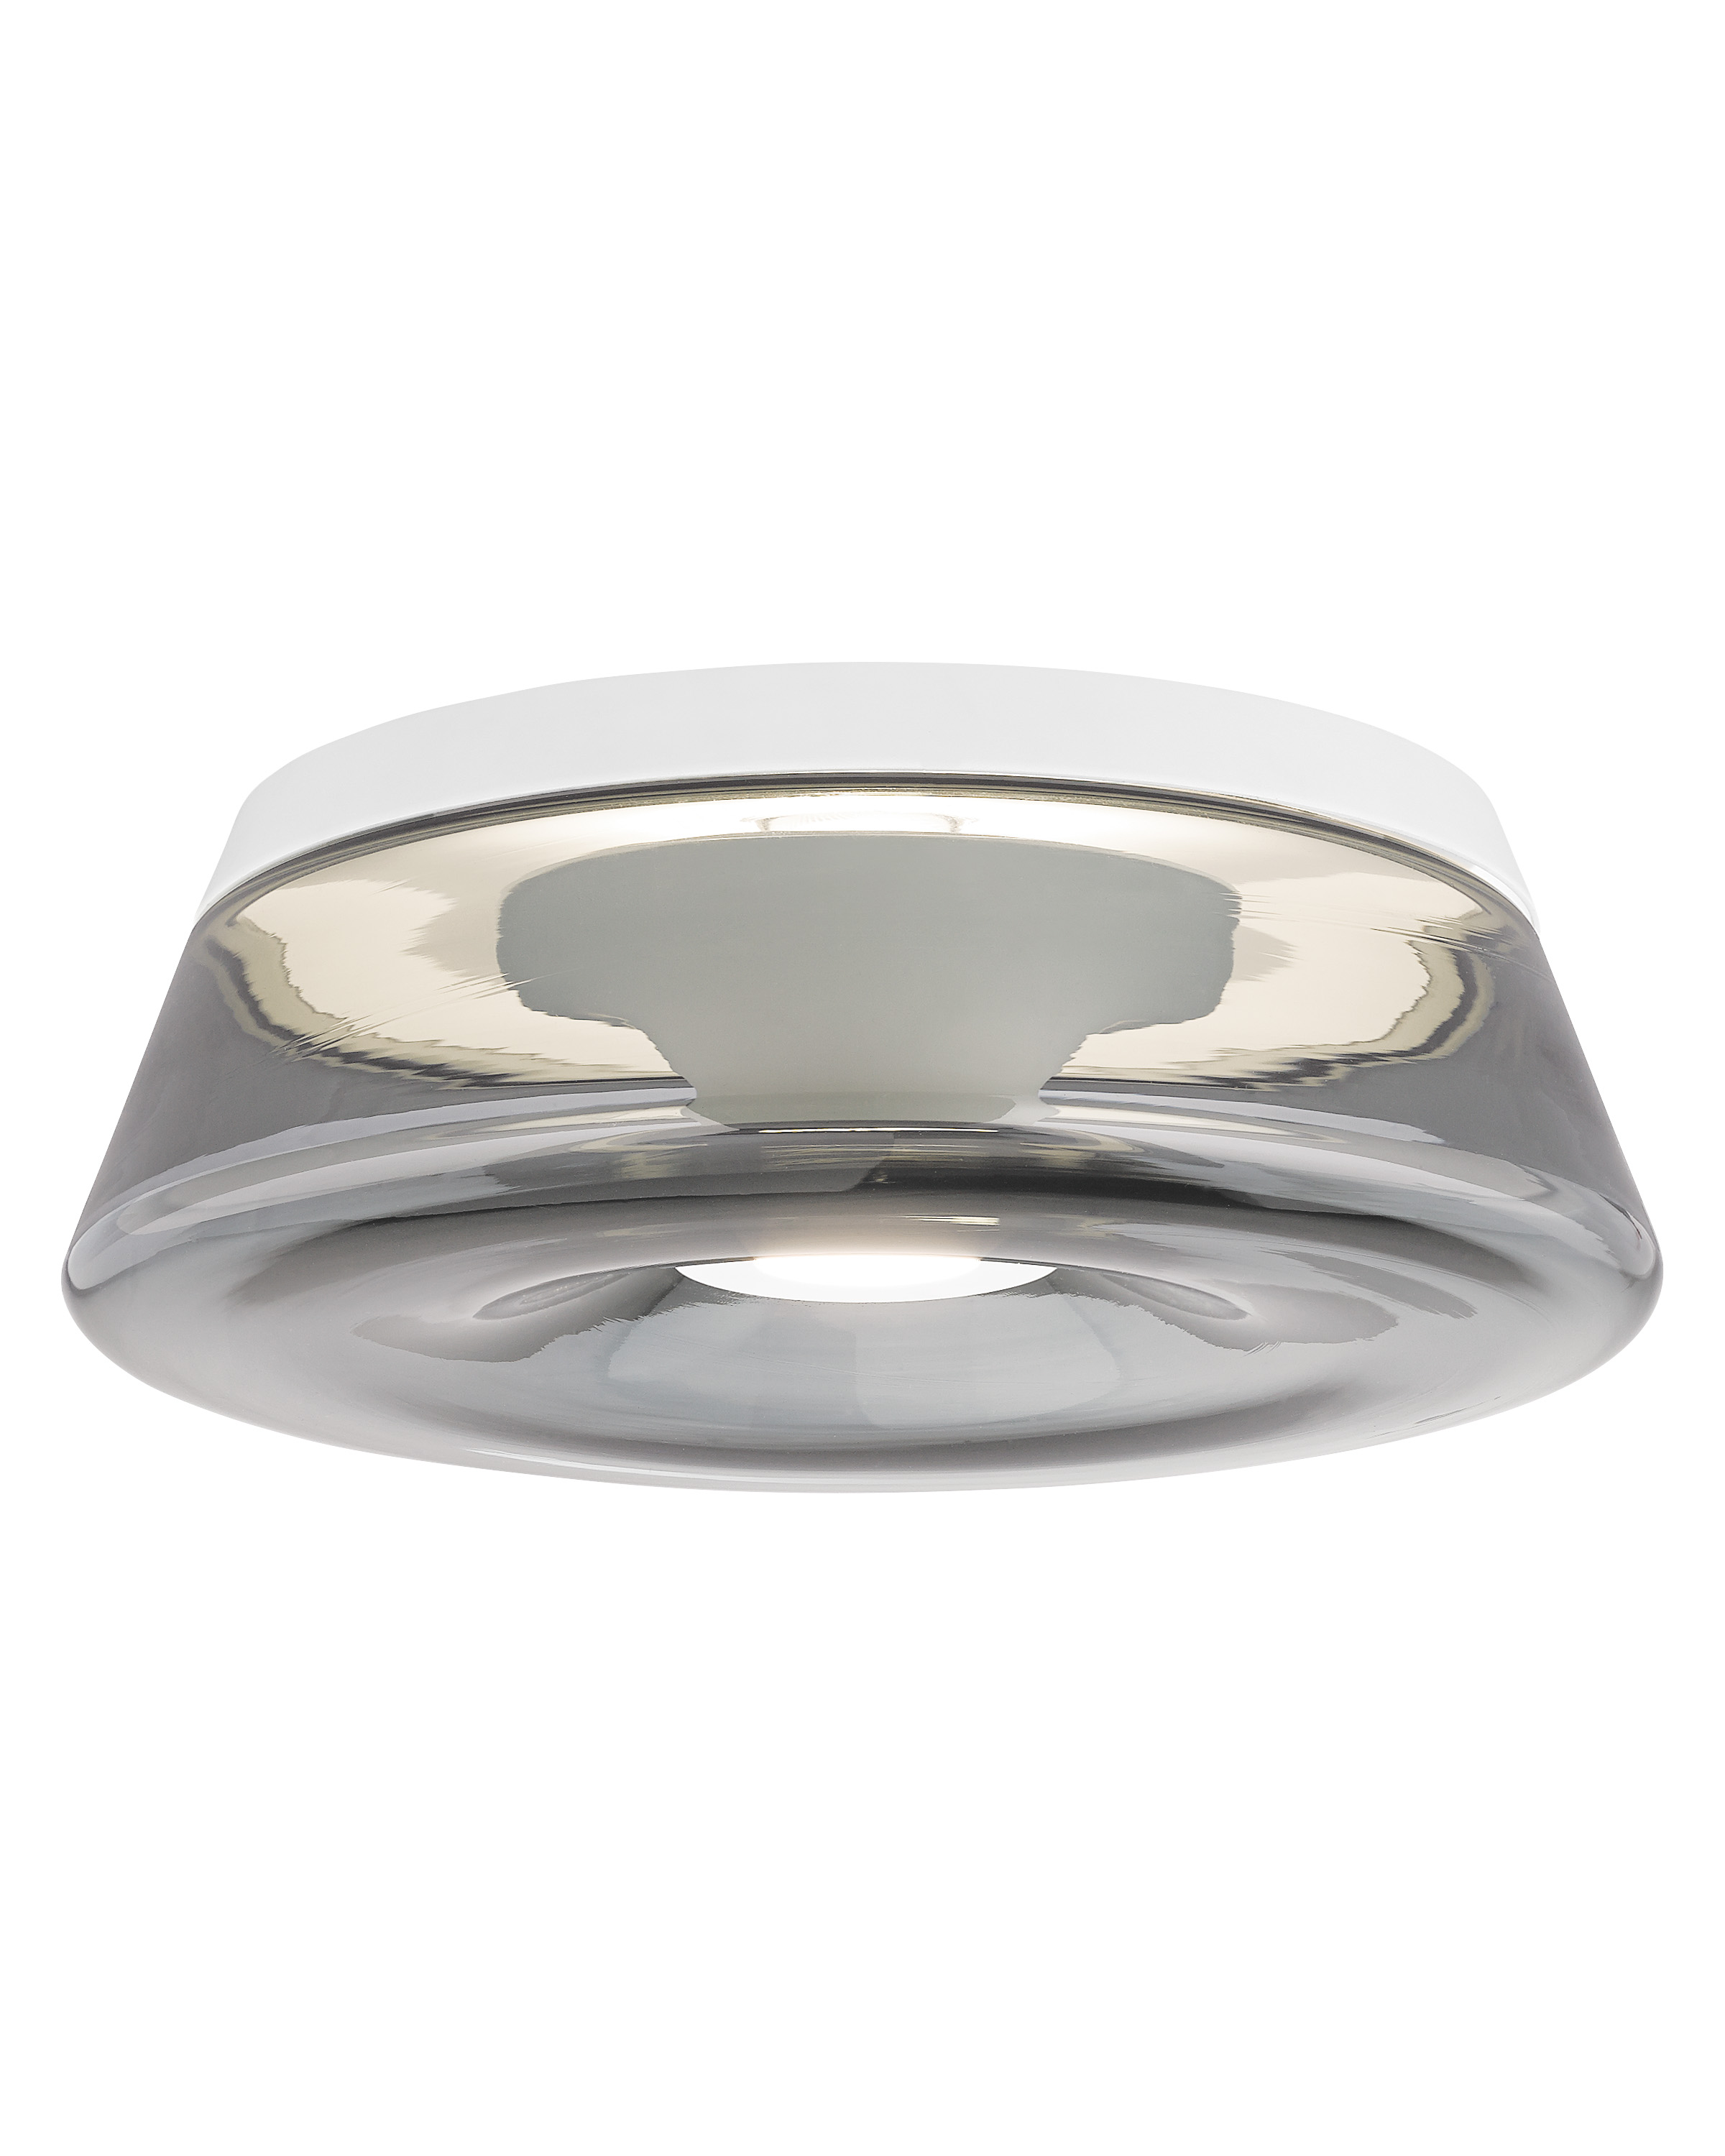 Highly sophisticated styling and incredible depth of design exude from this new, modern Ambist LED flush mount from Tech Lighting